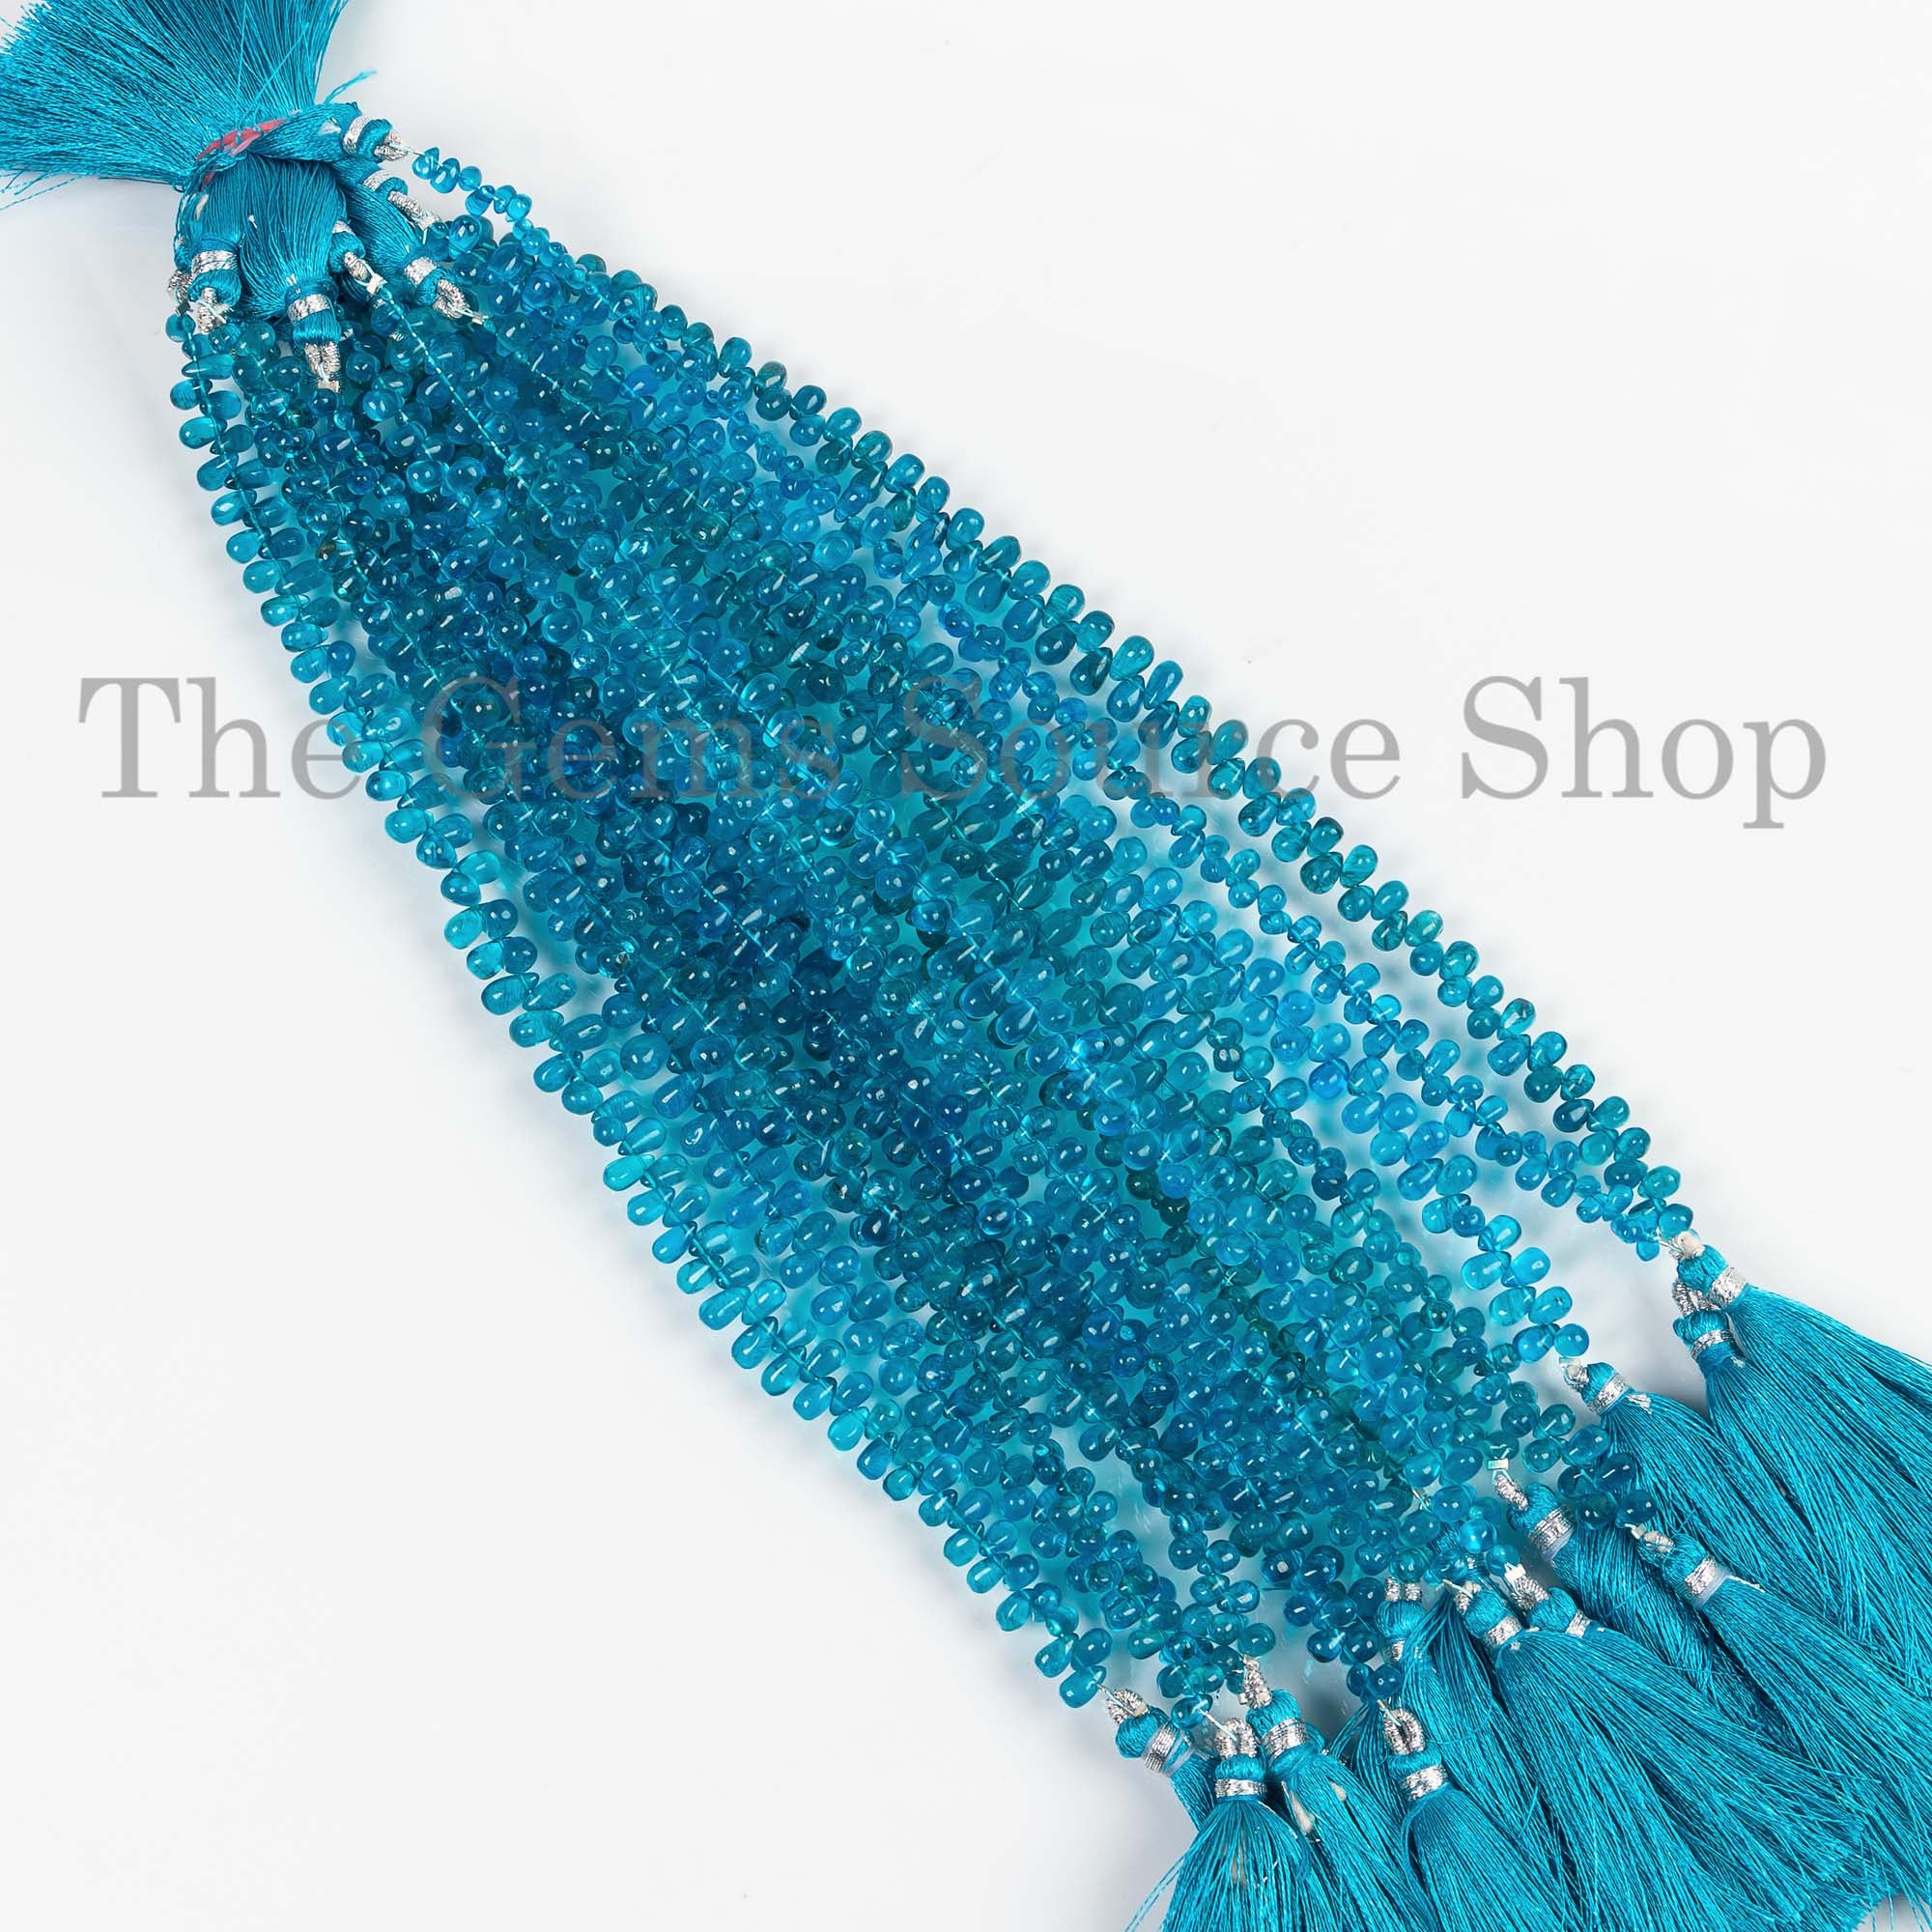 3.5x5-4x7.5mm Top Quality Neon Apatite Beads, Neon Apatite Beads, Smooth Beads, Tear Drop Briolette, Apatite Drop Beads, Gemstone Beads